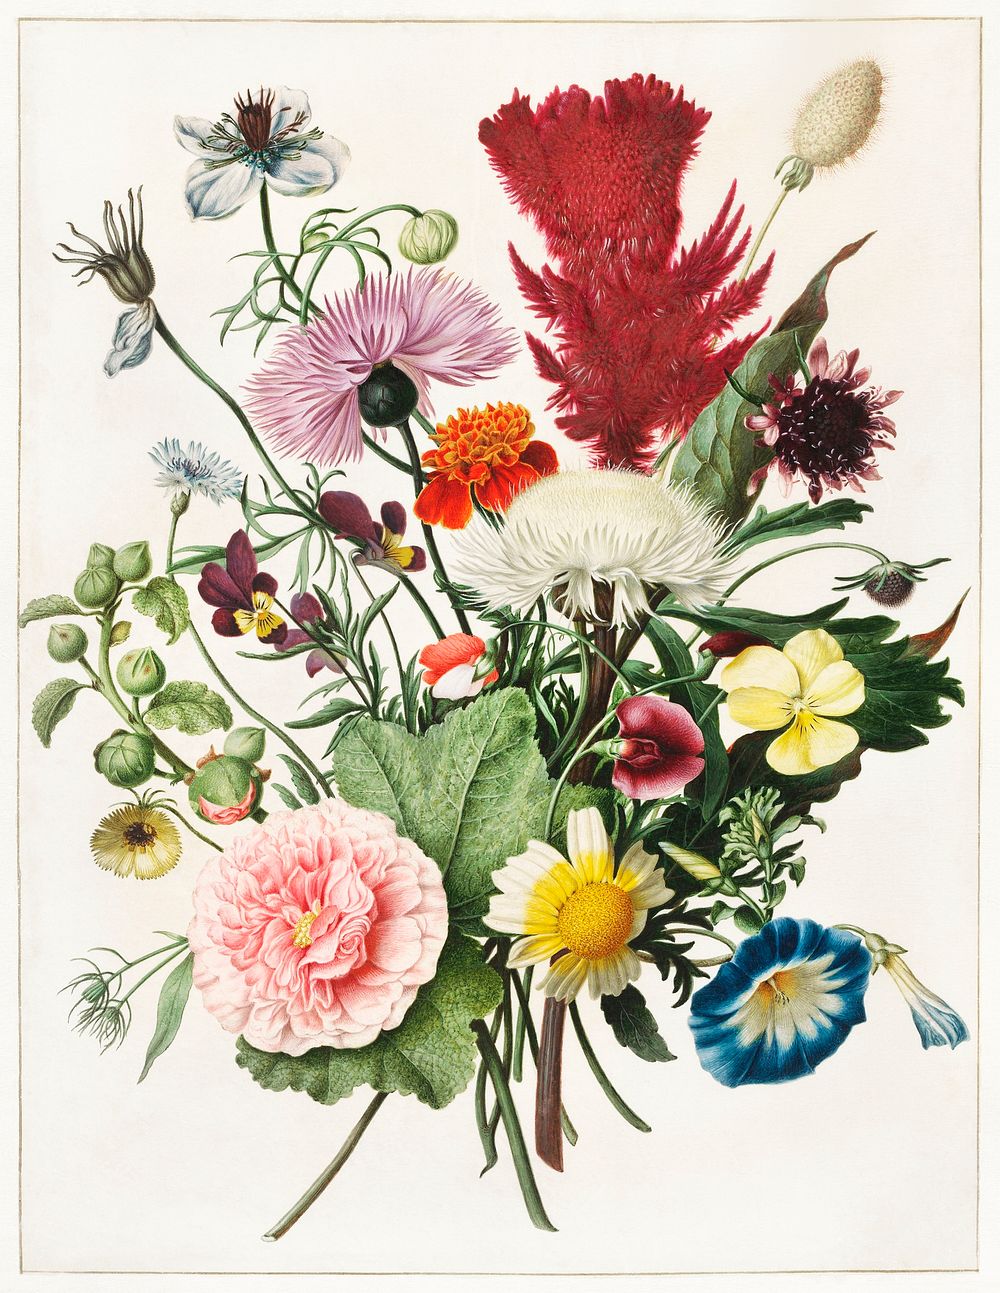 Bouquet of Flowers by an anonymous artist (1680). Original from The Rijksmuseum. Digitally enhanced by rawpixel.